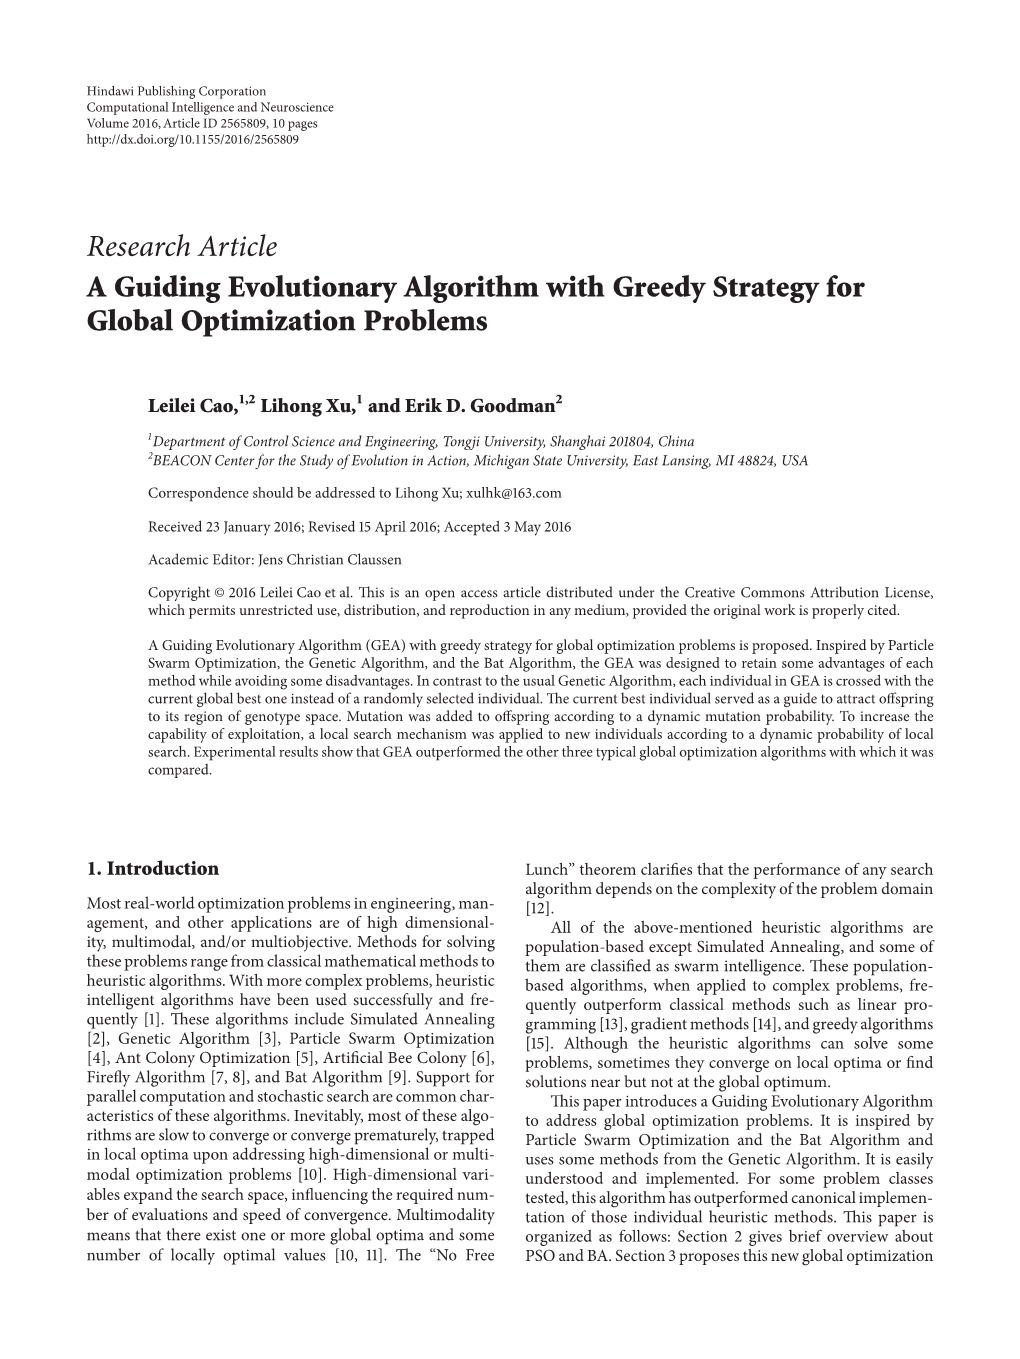 Research Article a Guiding Evolutionary Algorithm with Greedy Strategy for Global Optimization Problems